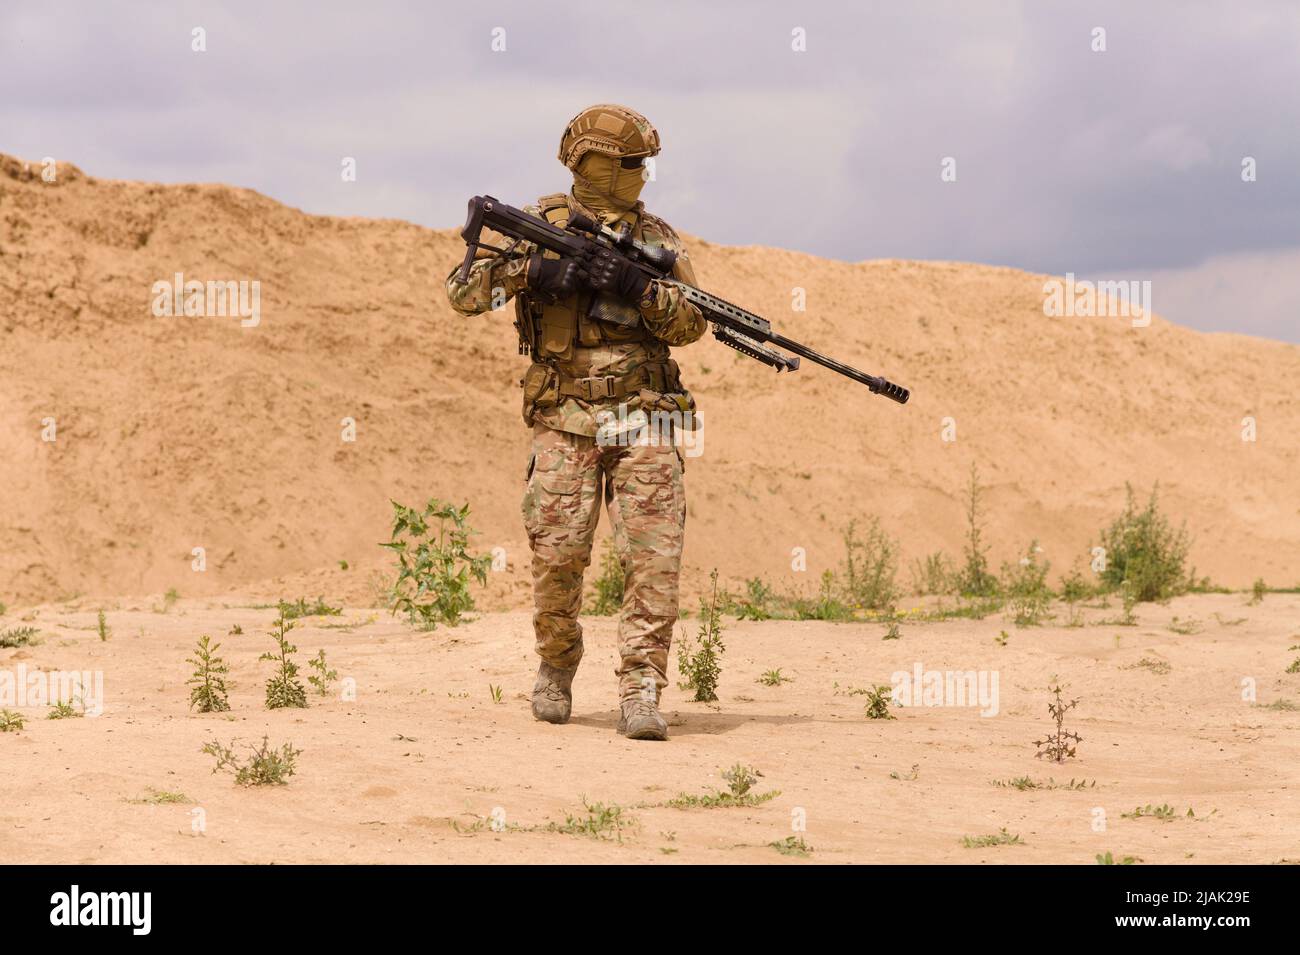 Equipped and armed special forces soldier with rifle in the desert during a military operation. Stock Photo